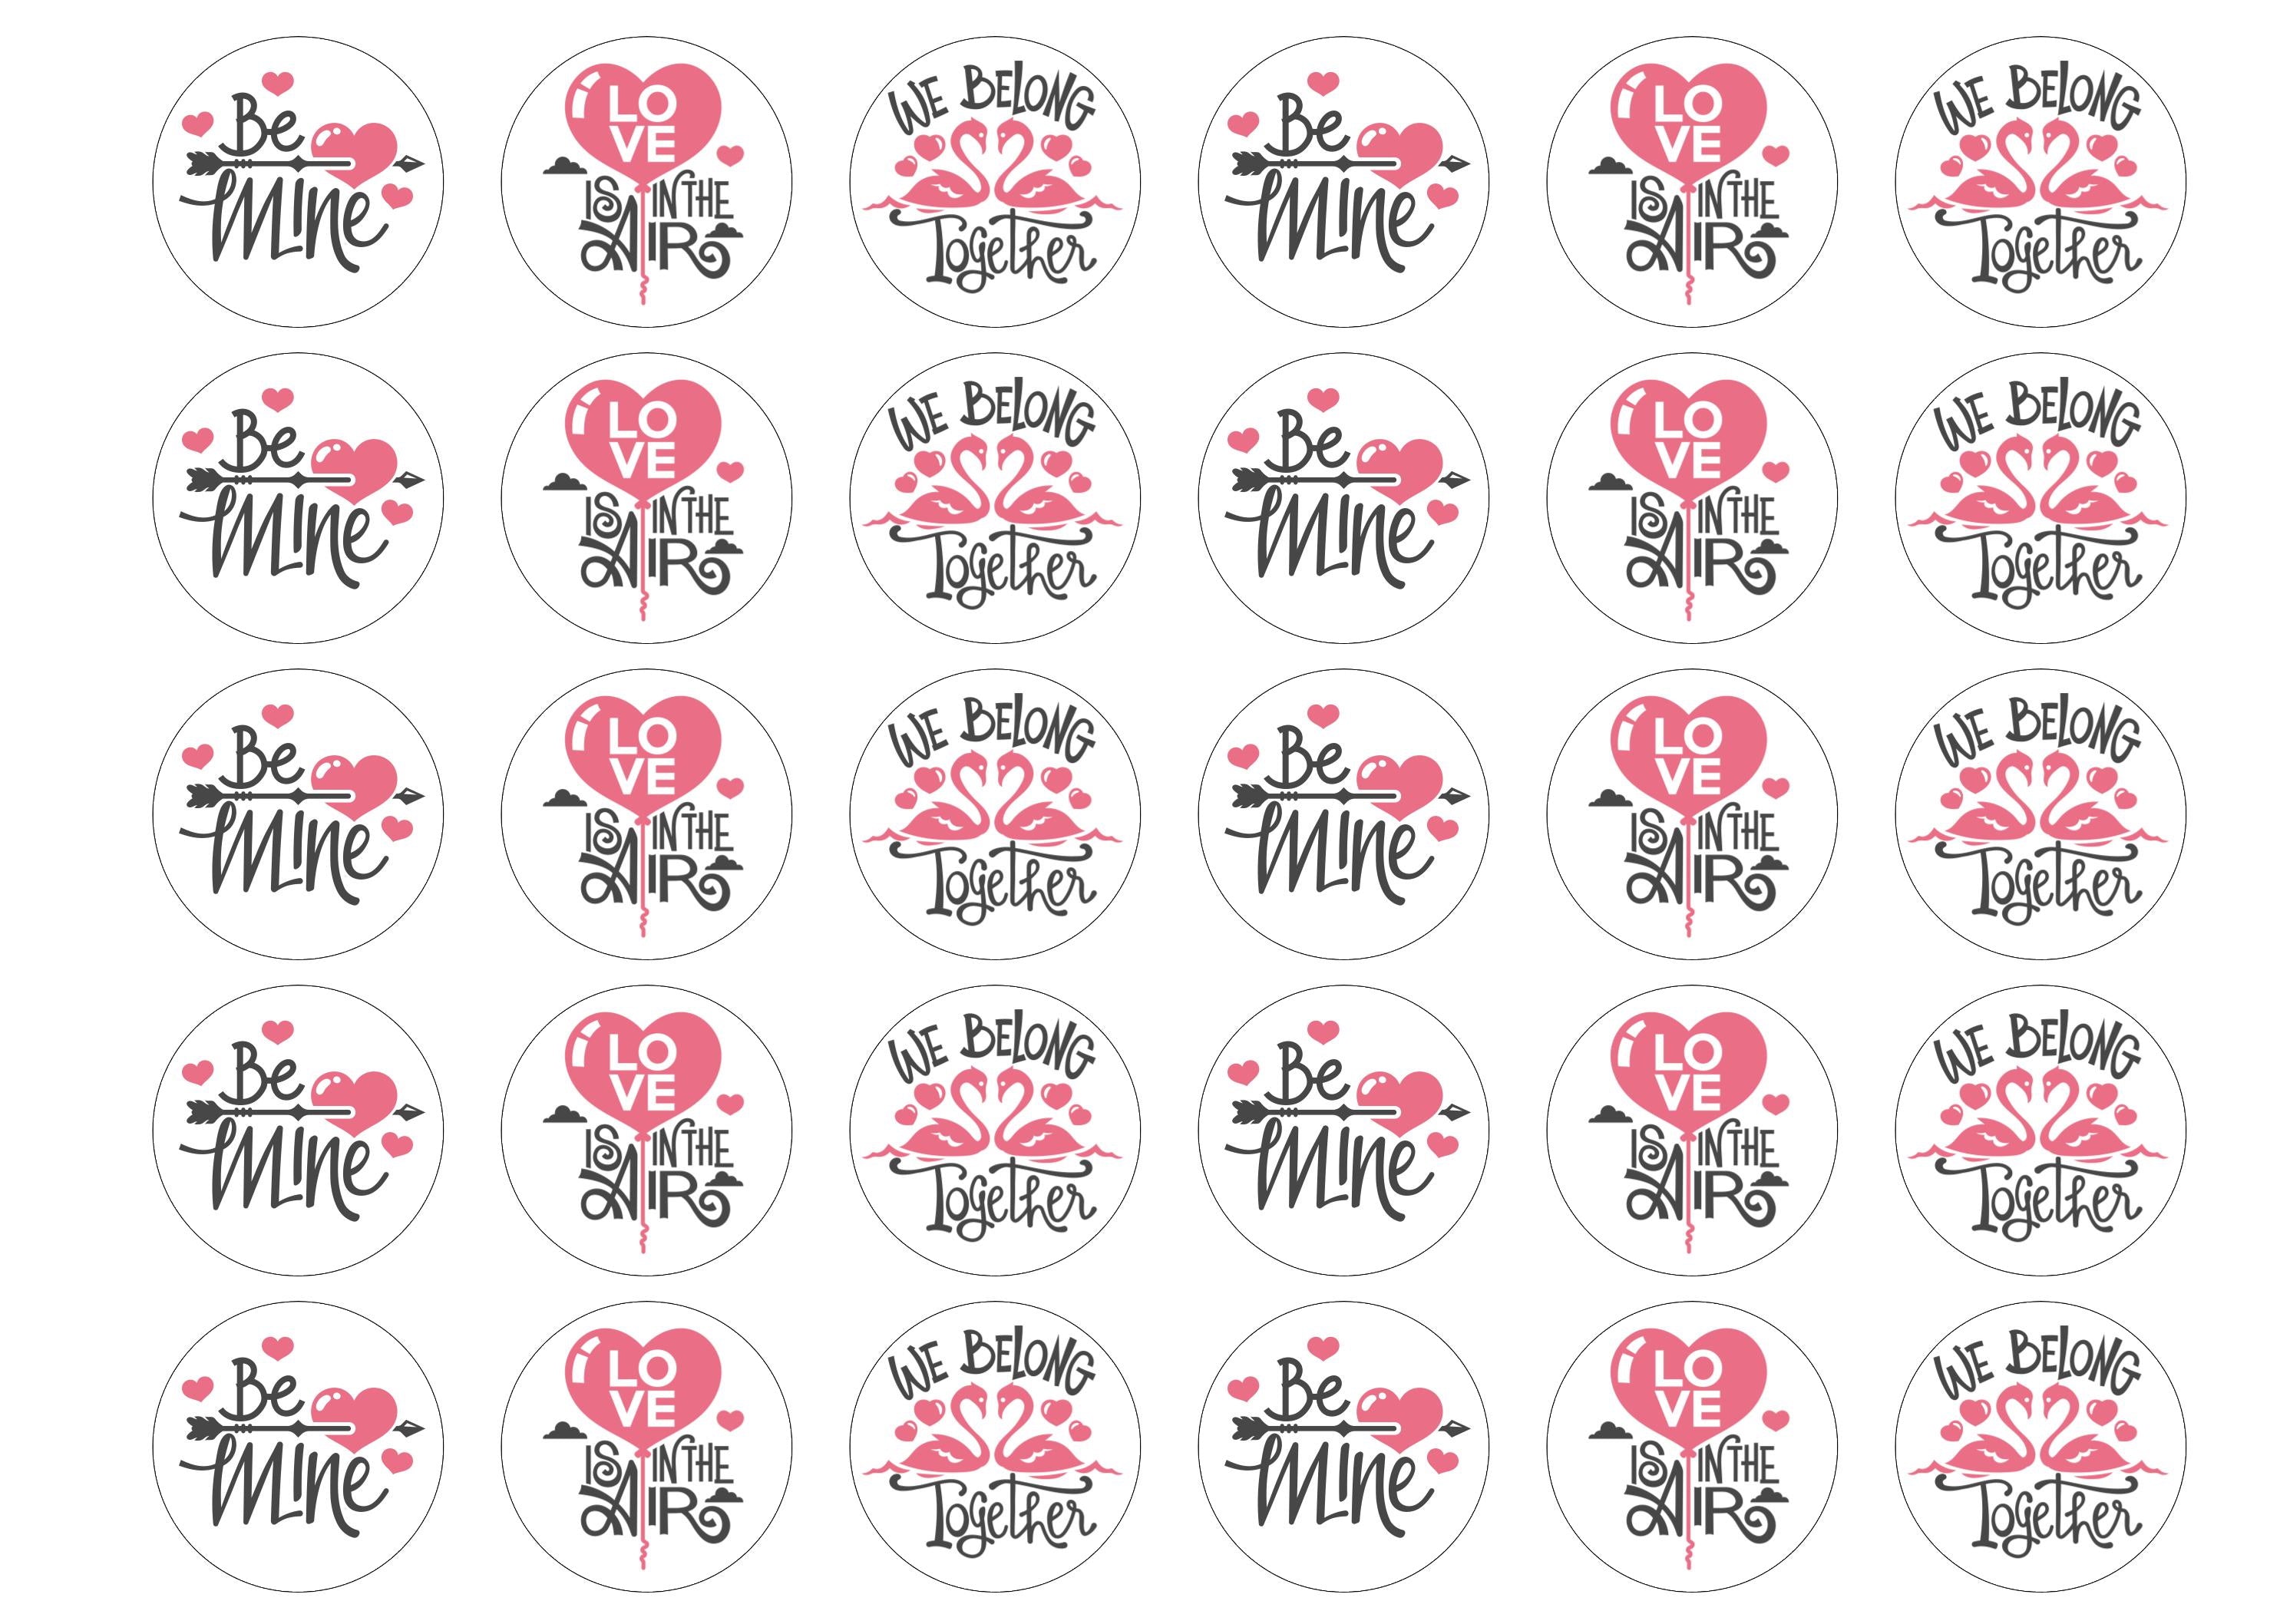 30 cupcake toppers with Flamingo themed valentine messages